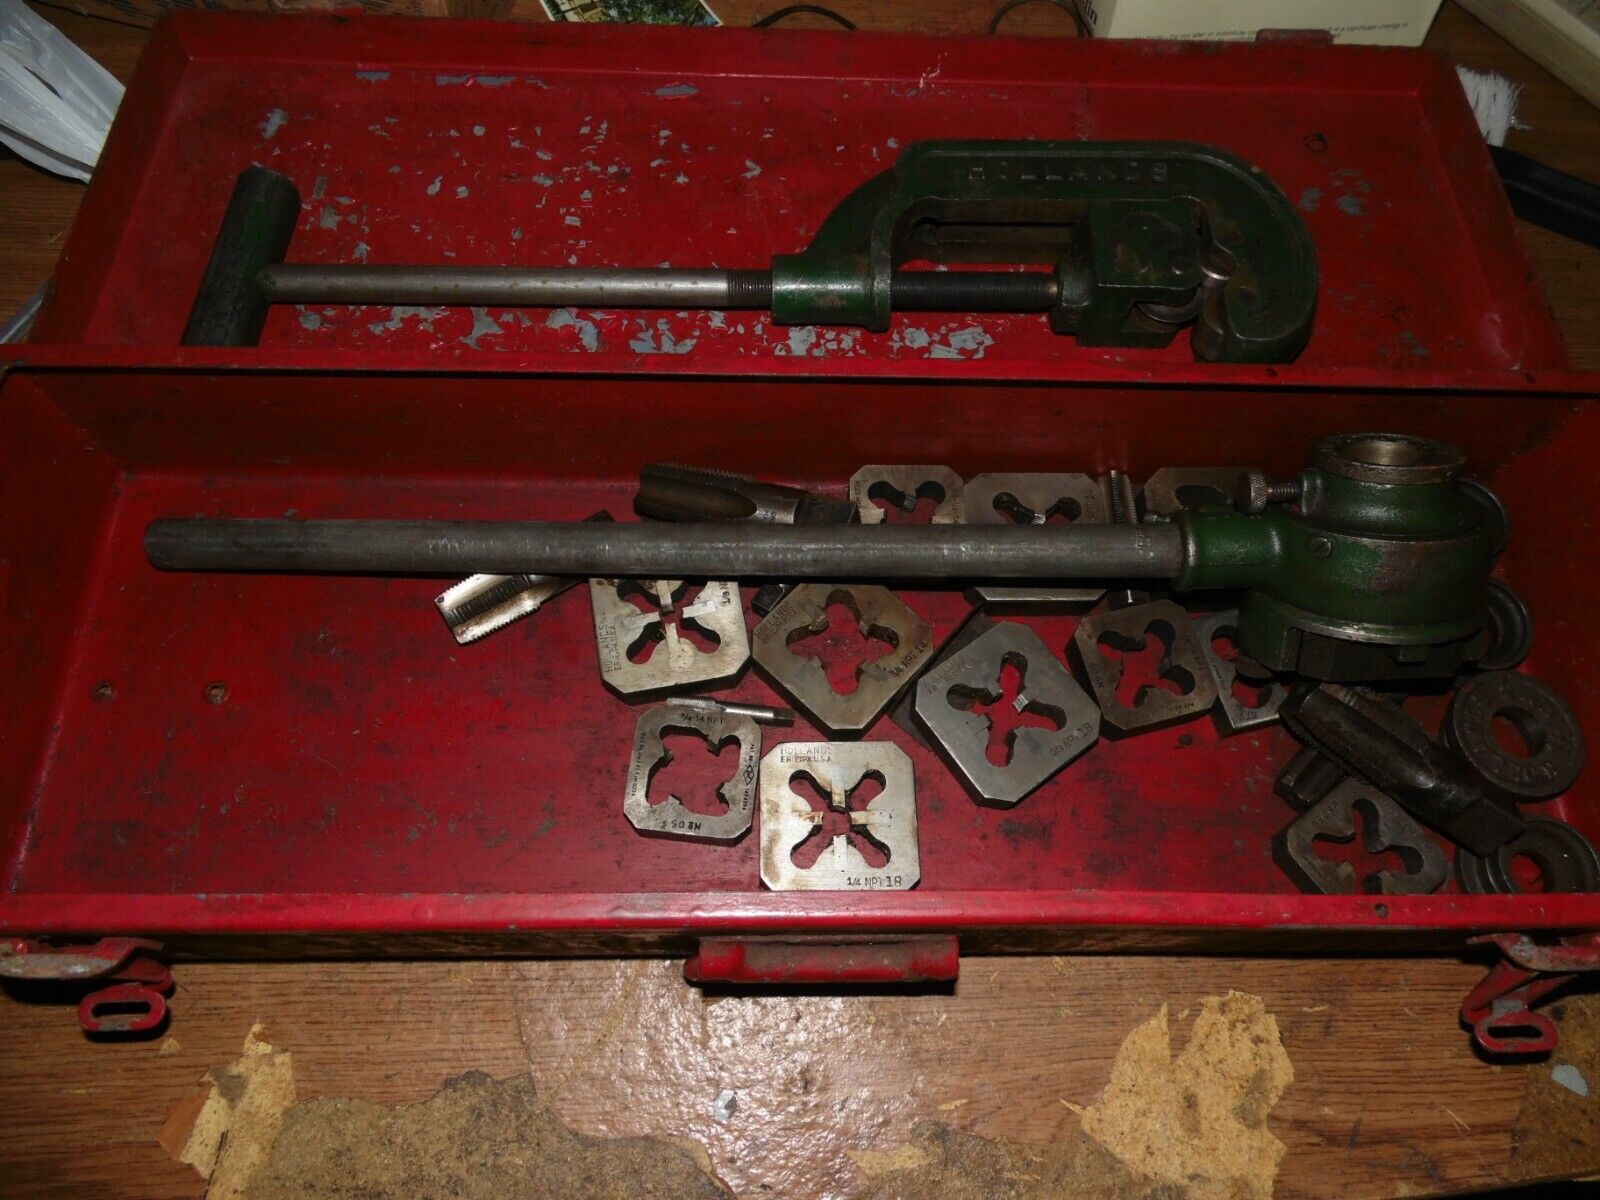 Vintage Hollands Erie PA Tap & Die Set & Heavy Duty Pipe Cutter w/ Tool Box